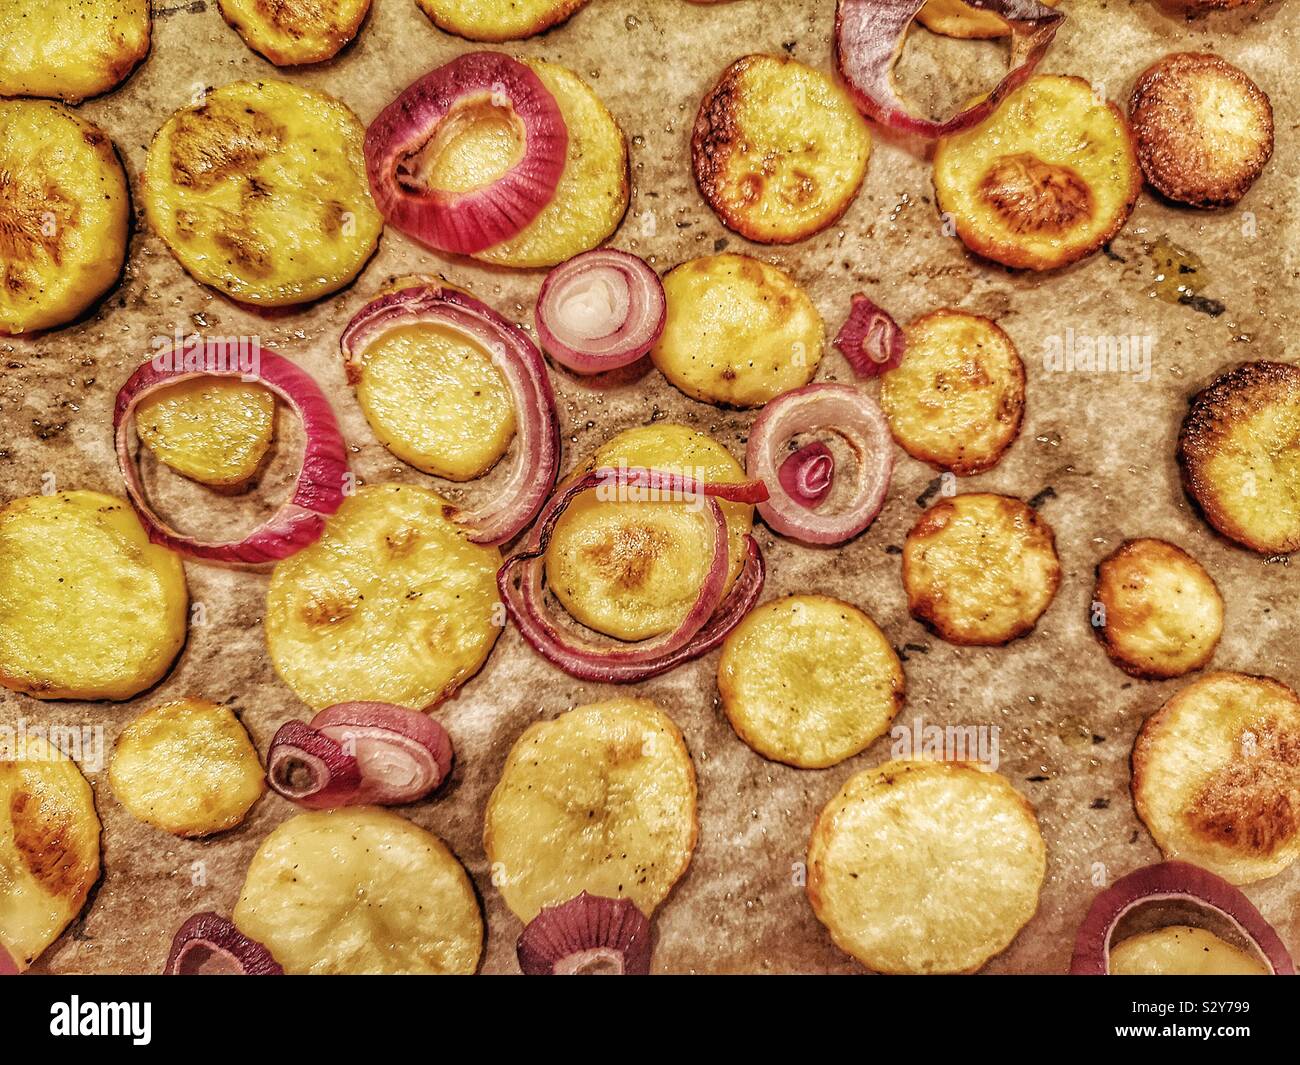 Freshly cooked homemade sauté potatoes with red onions on baking tray Stock Photo